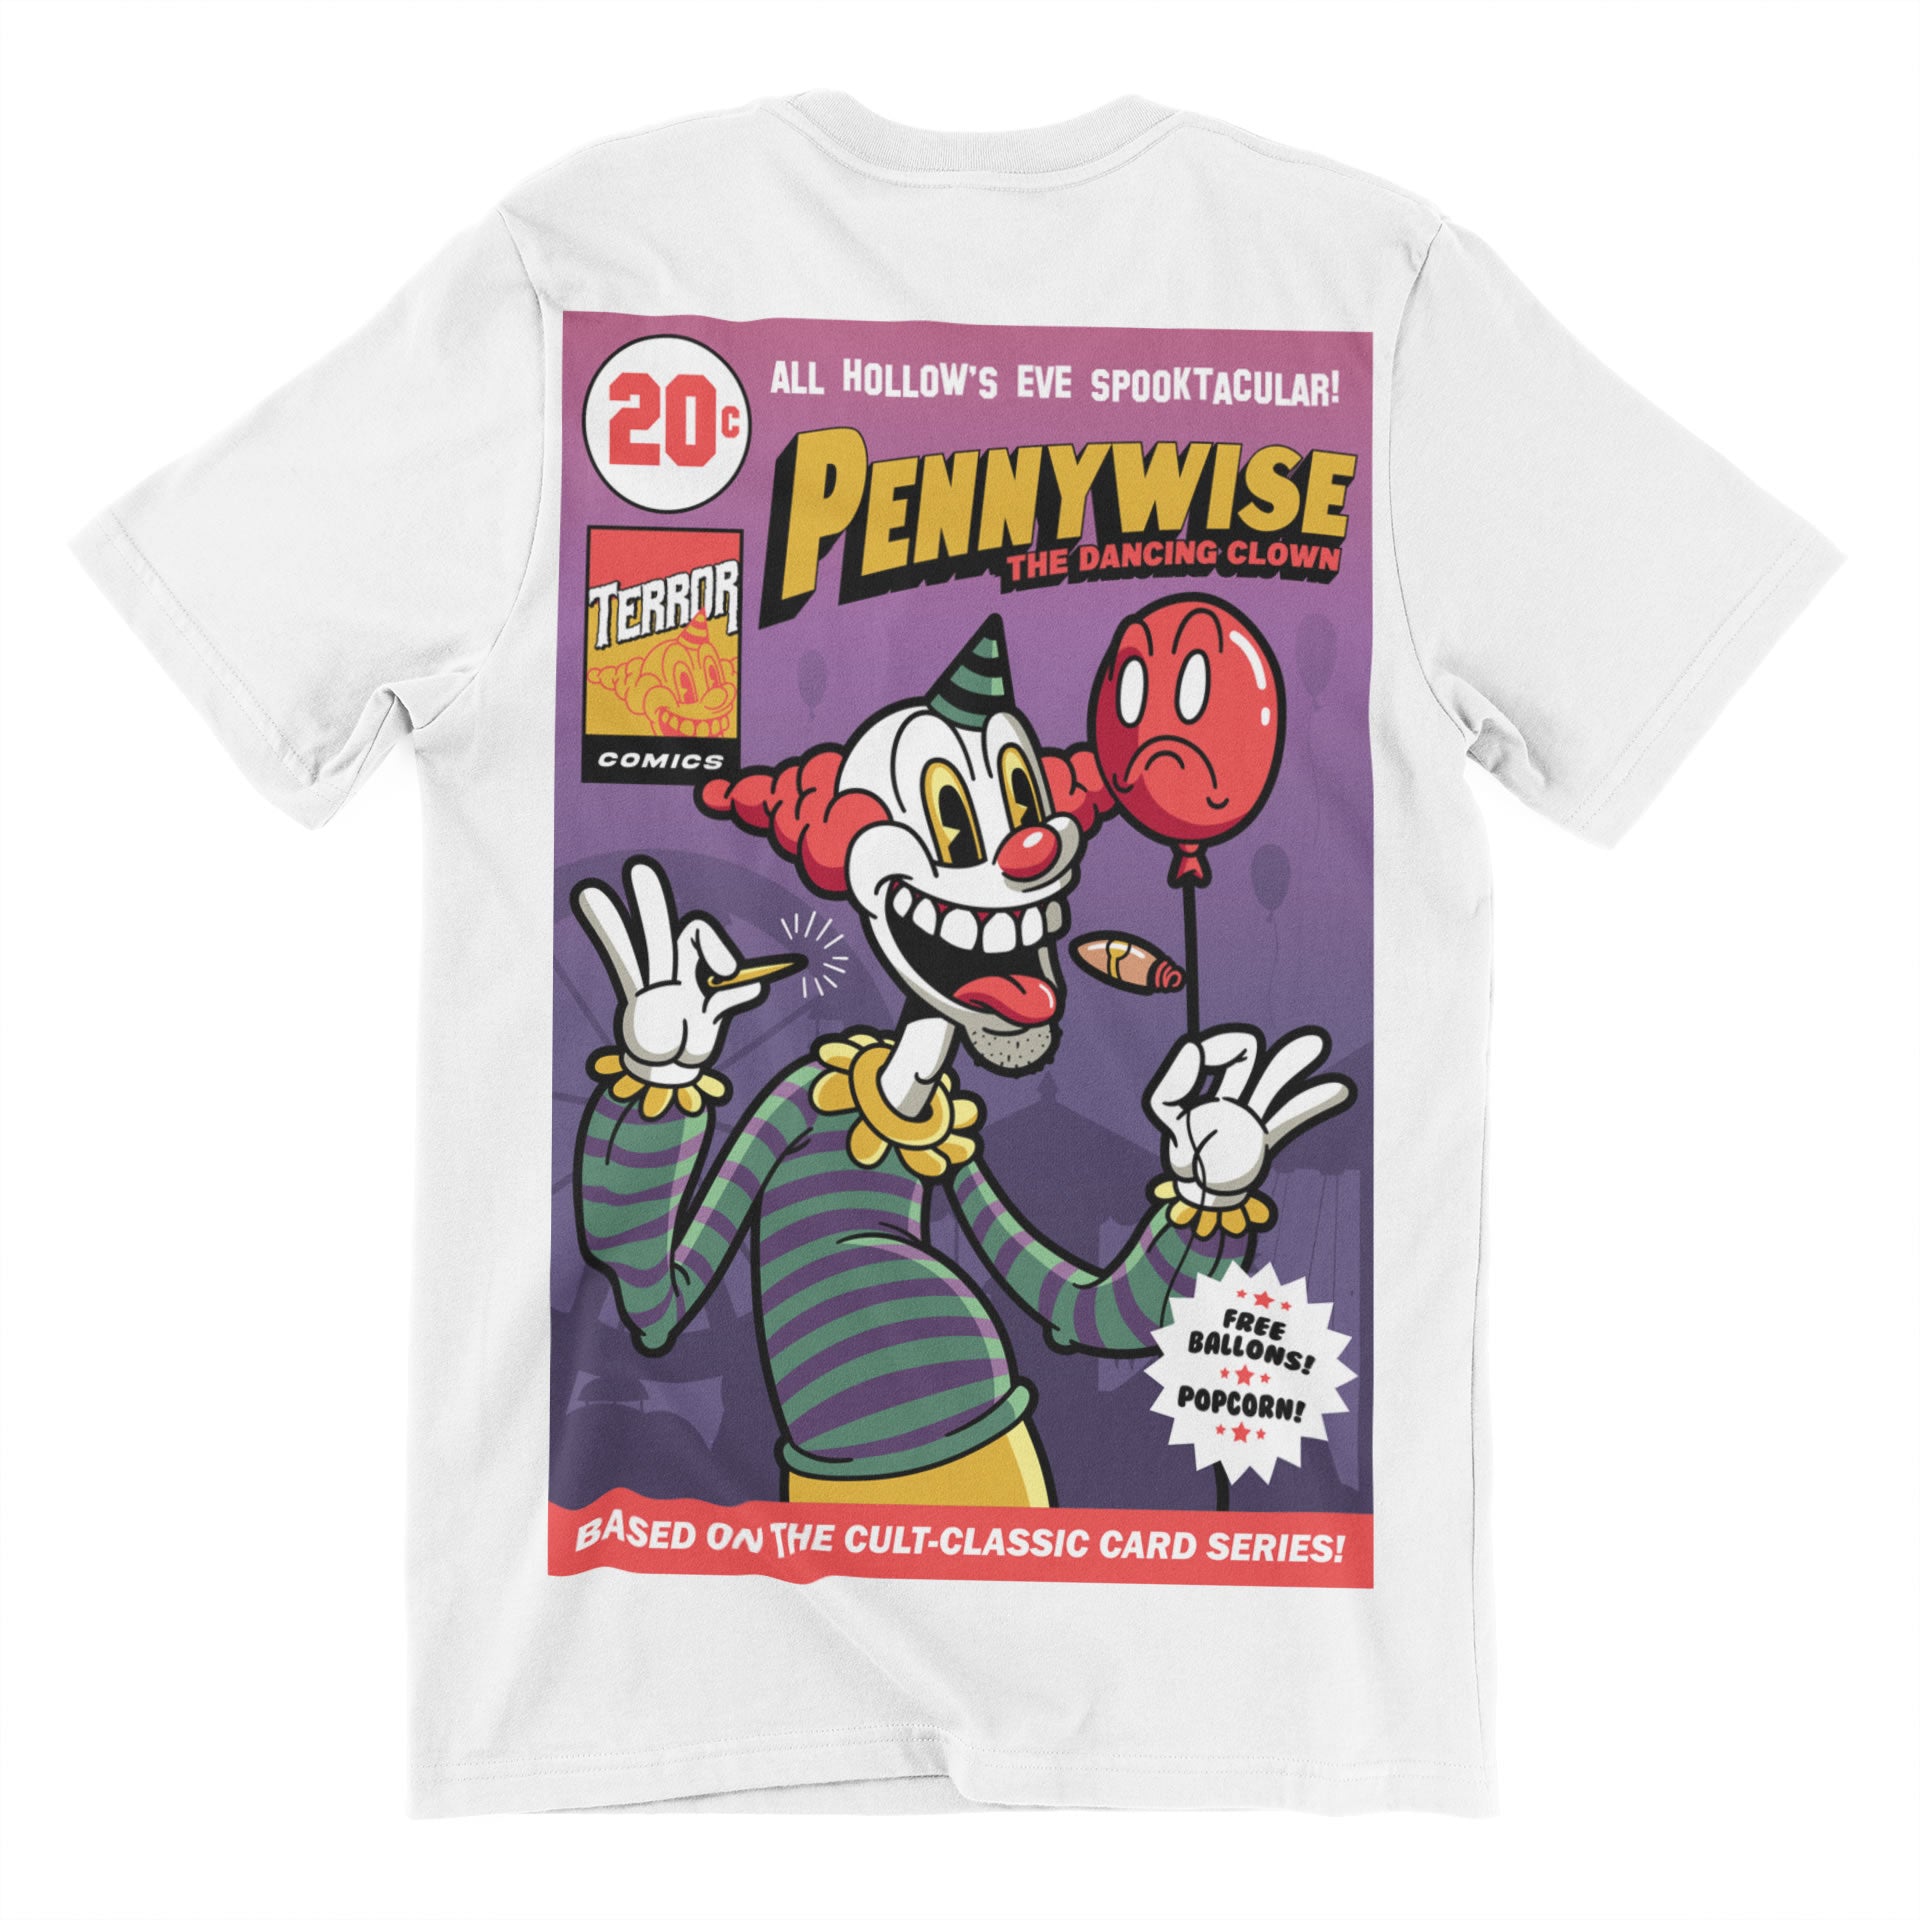 Pennywise Comic Cover Reproduction T-Shirt